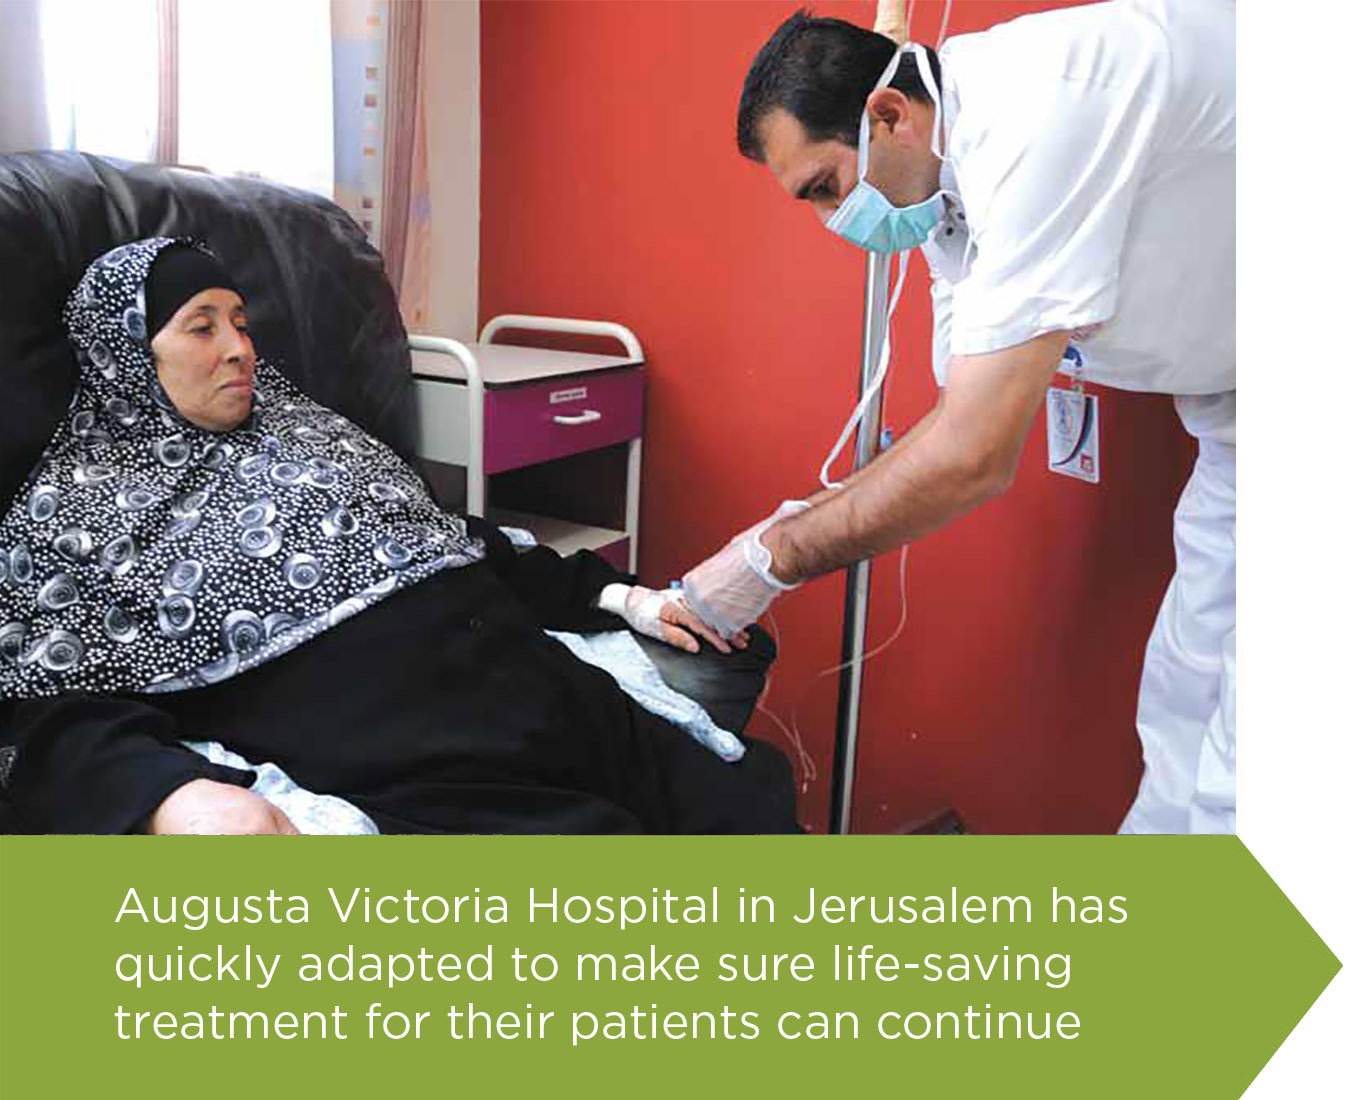 A woman receives treatment at Augusta Victoria Hospital.